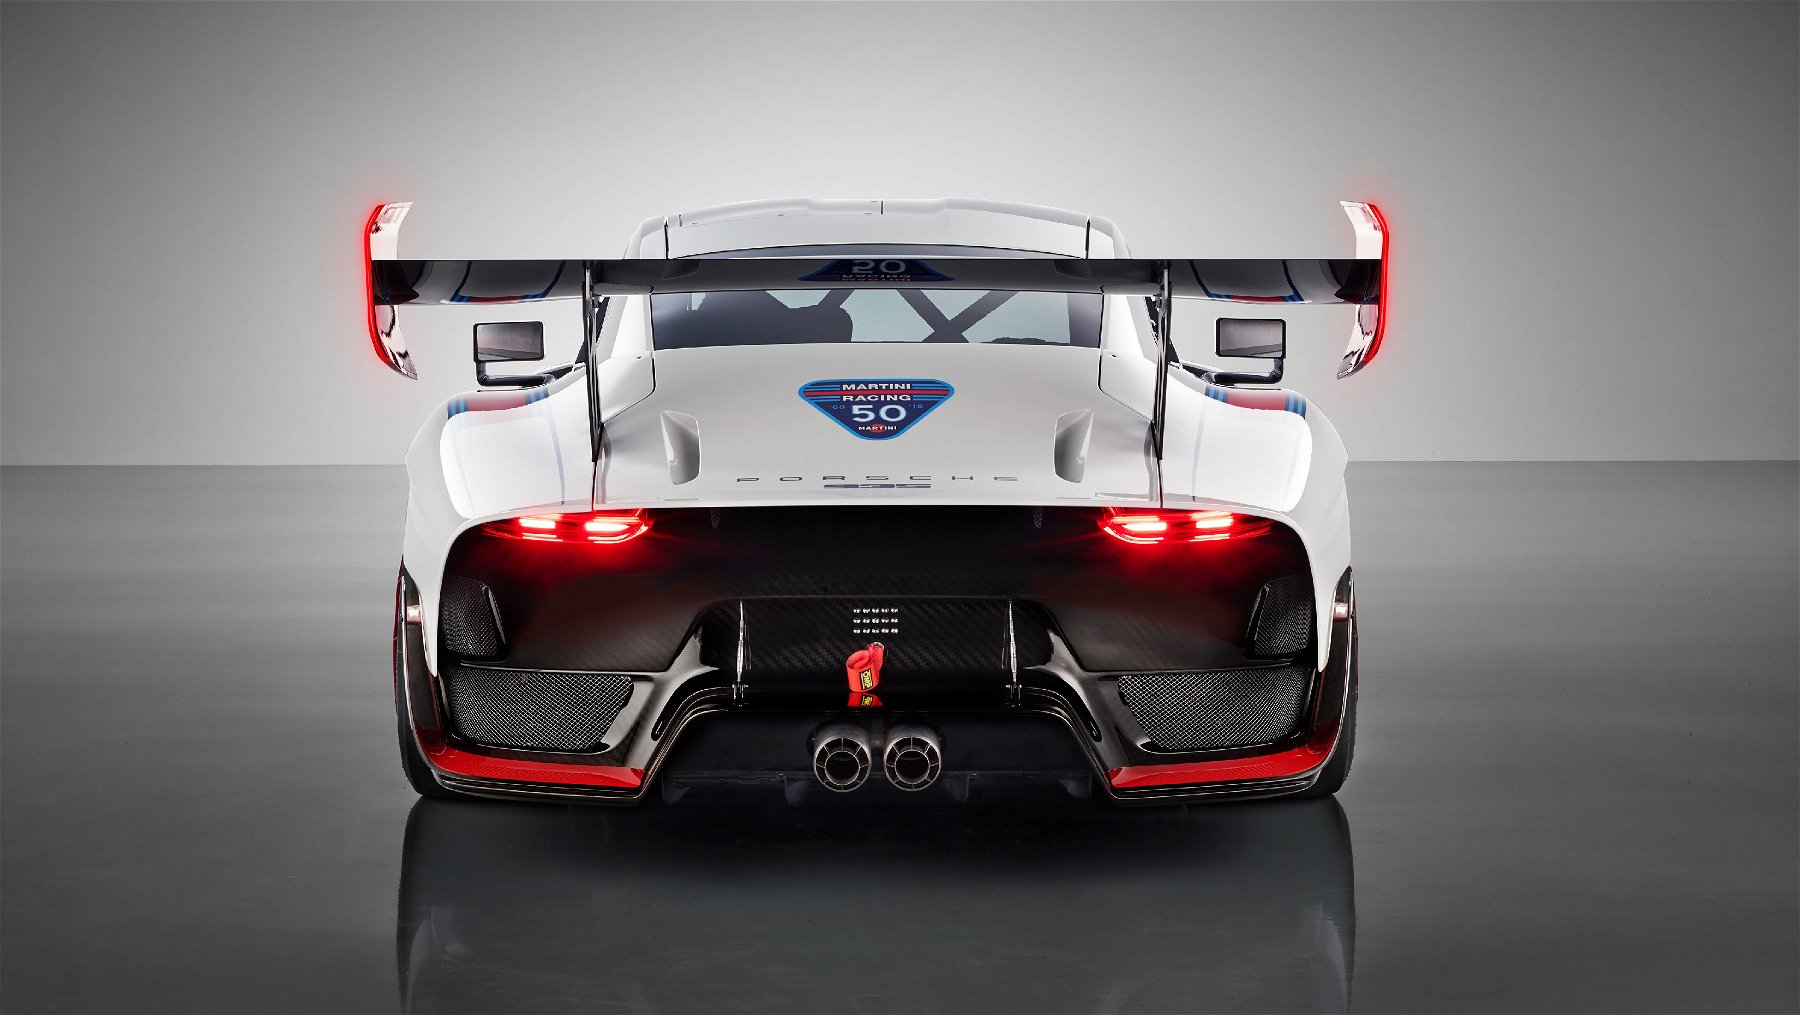 Moby Dick is alive! The Porsche 935 is back.